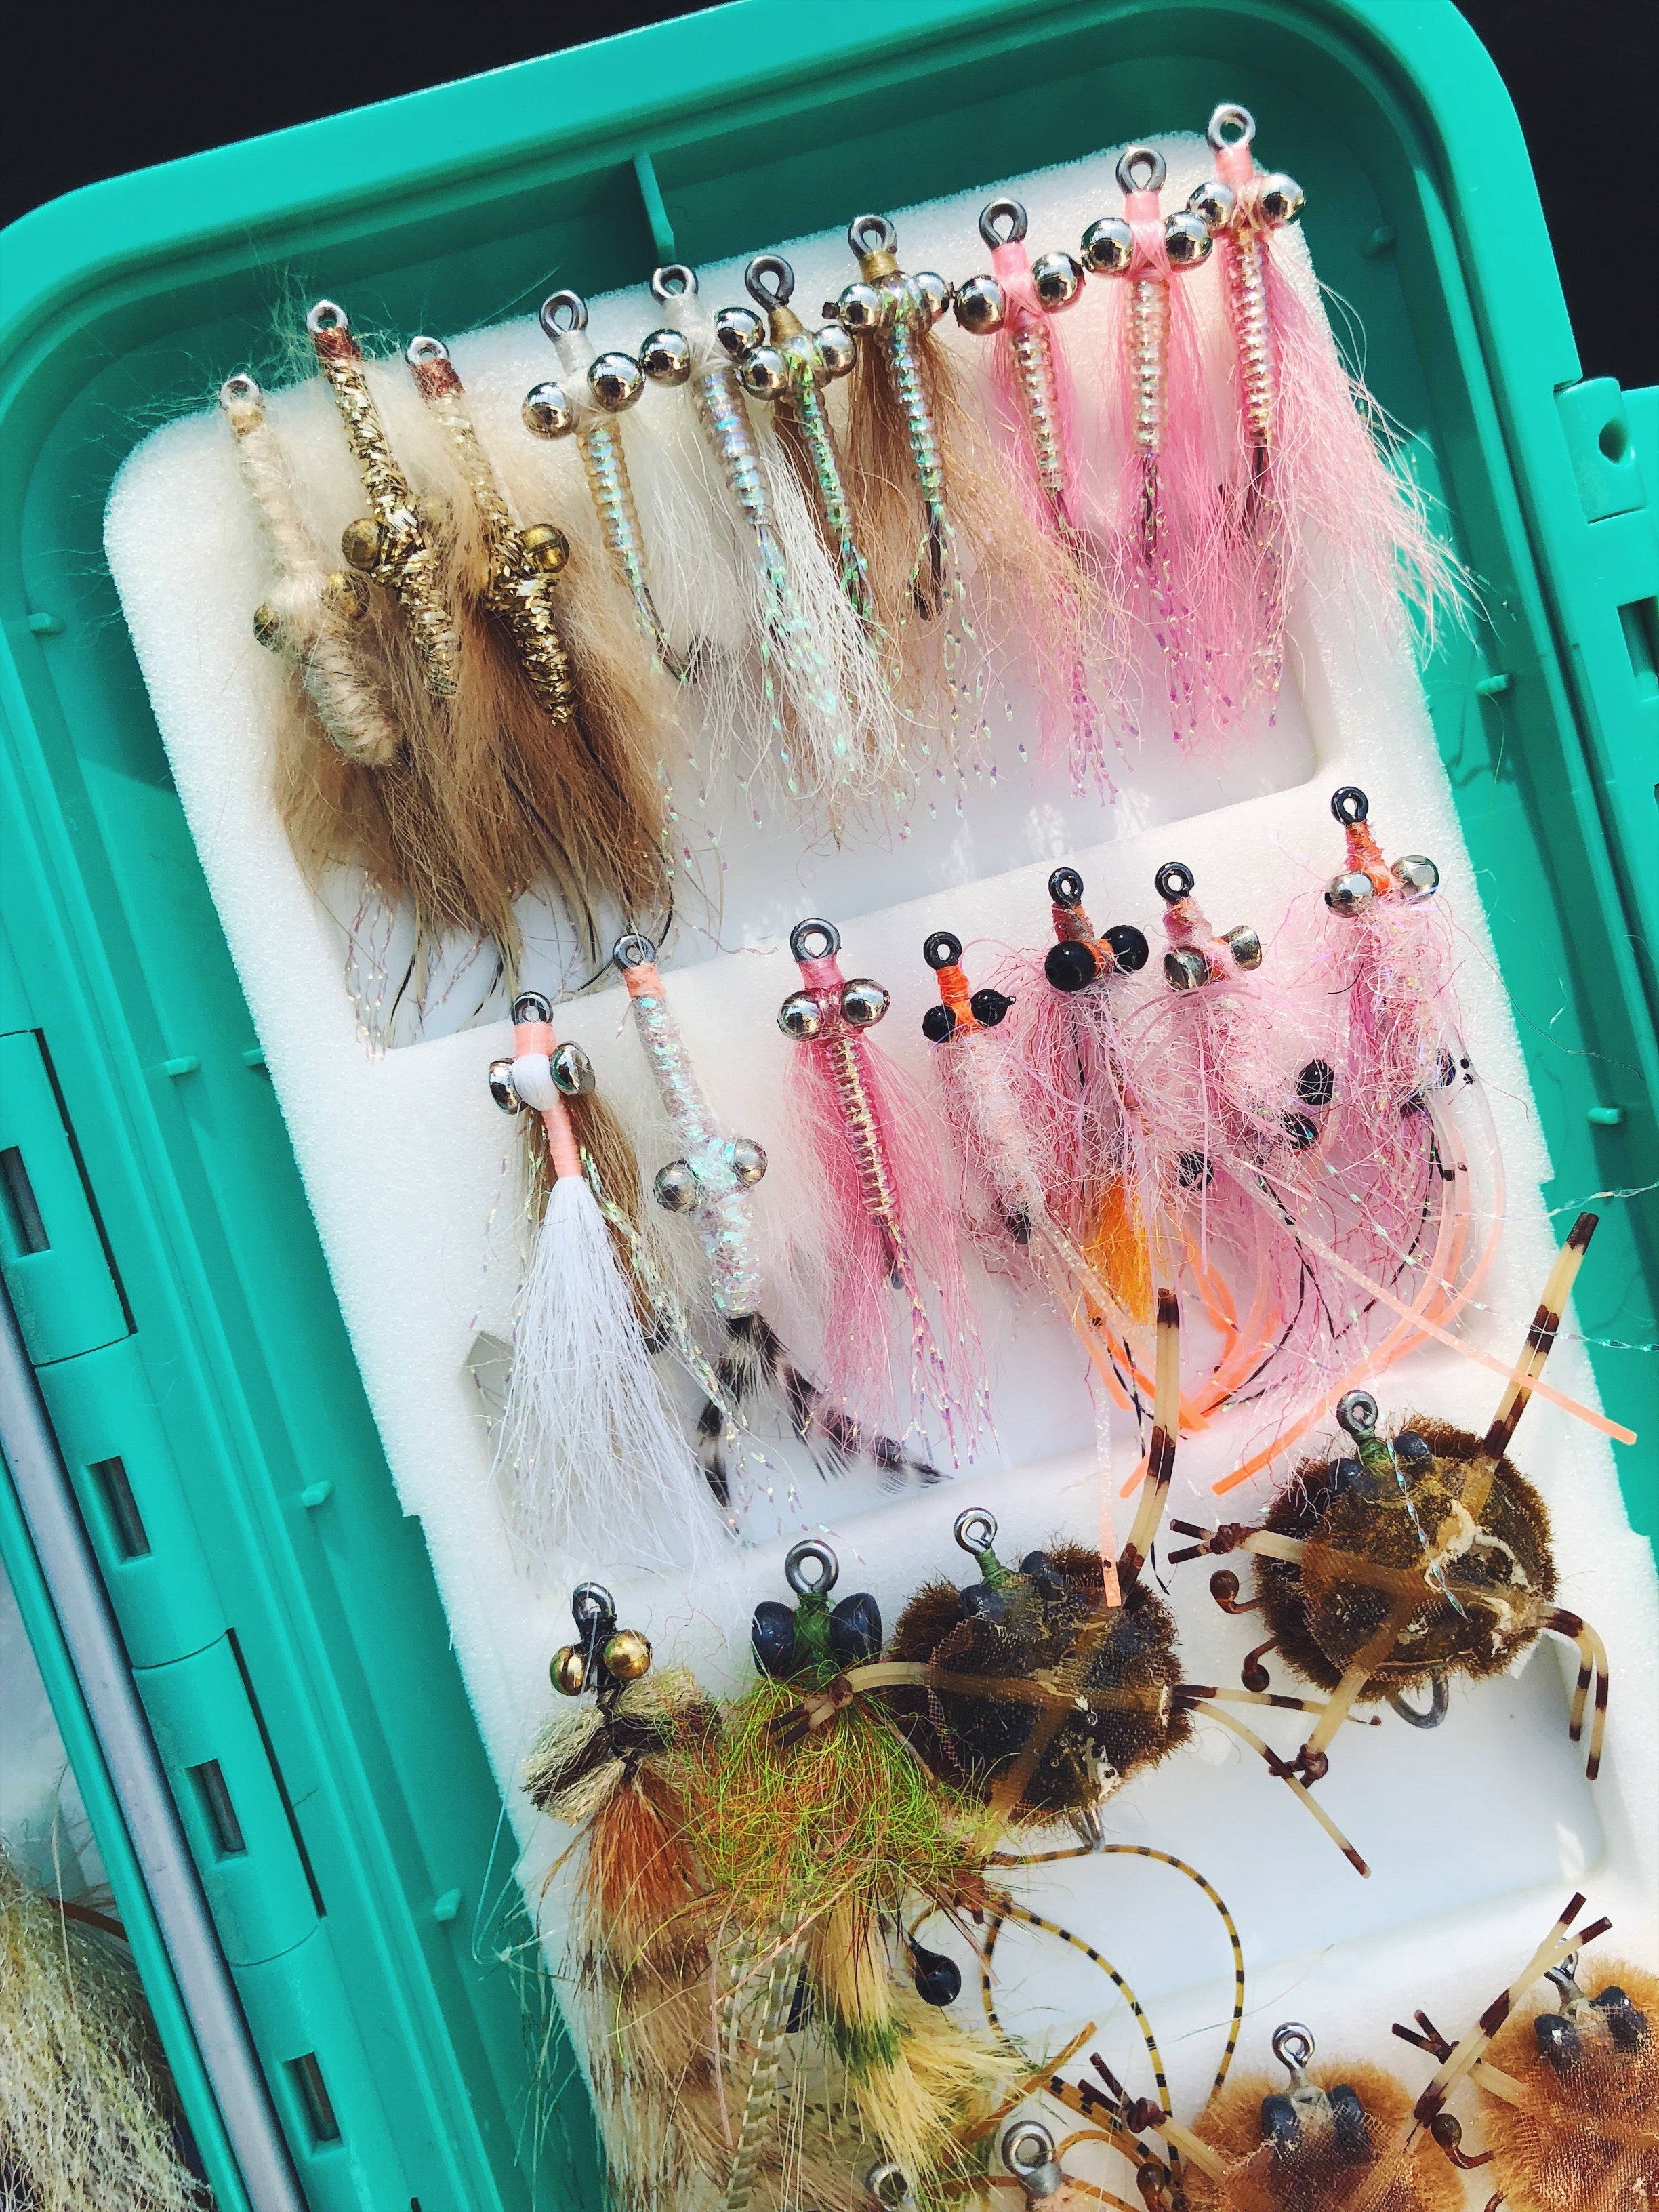 Premium Bonefish Selection - Salmon Fishing Flies from Helmsdale Company